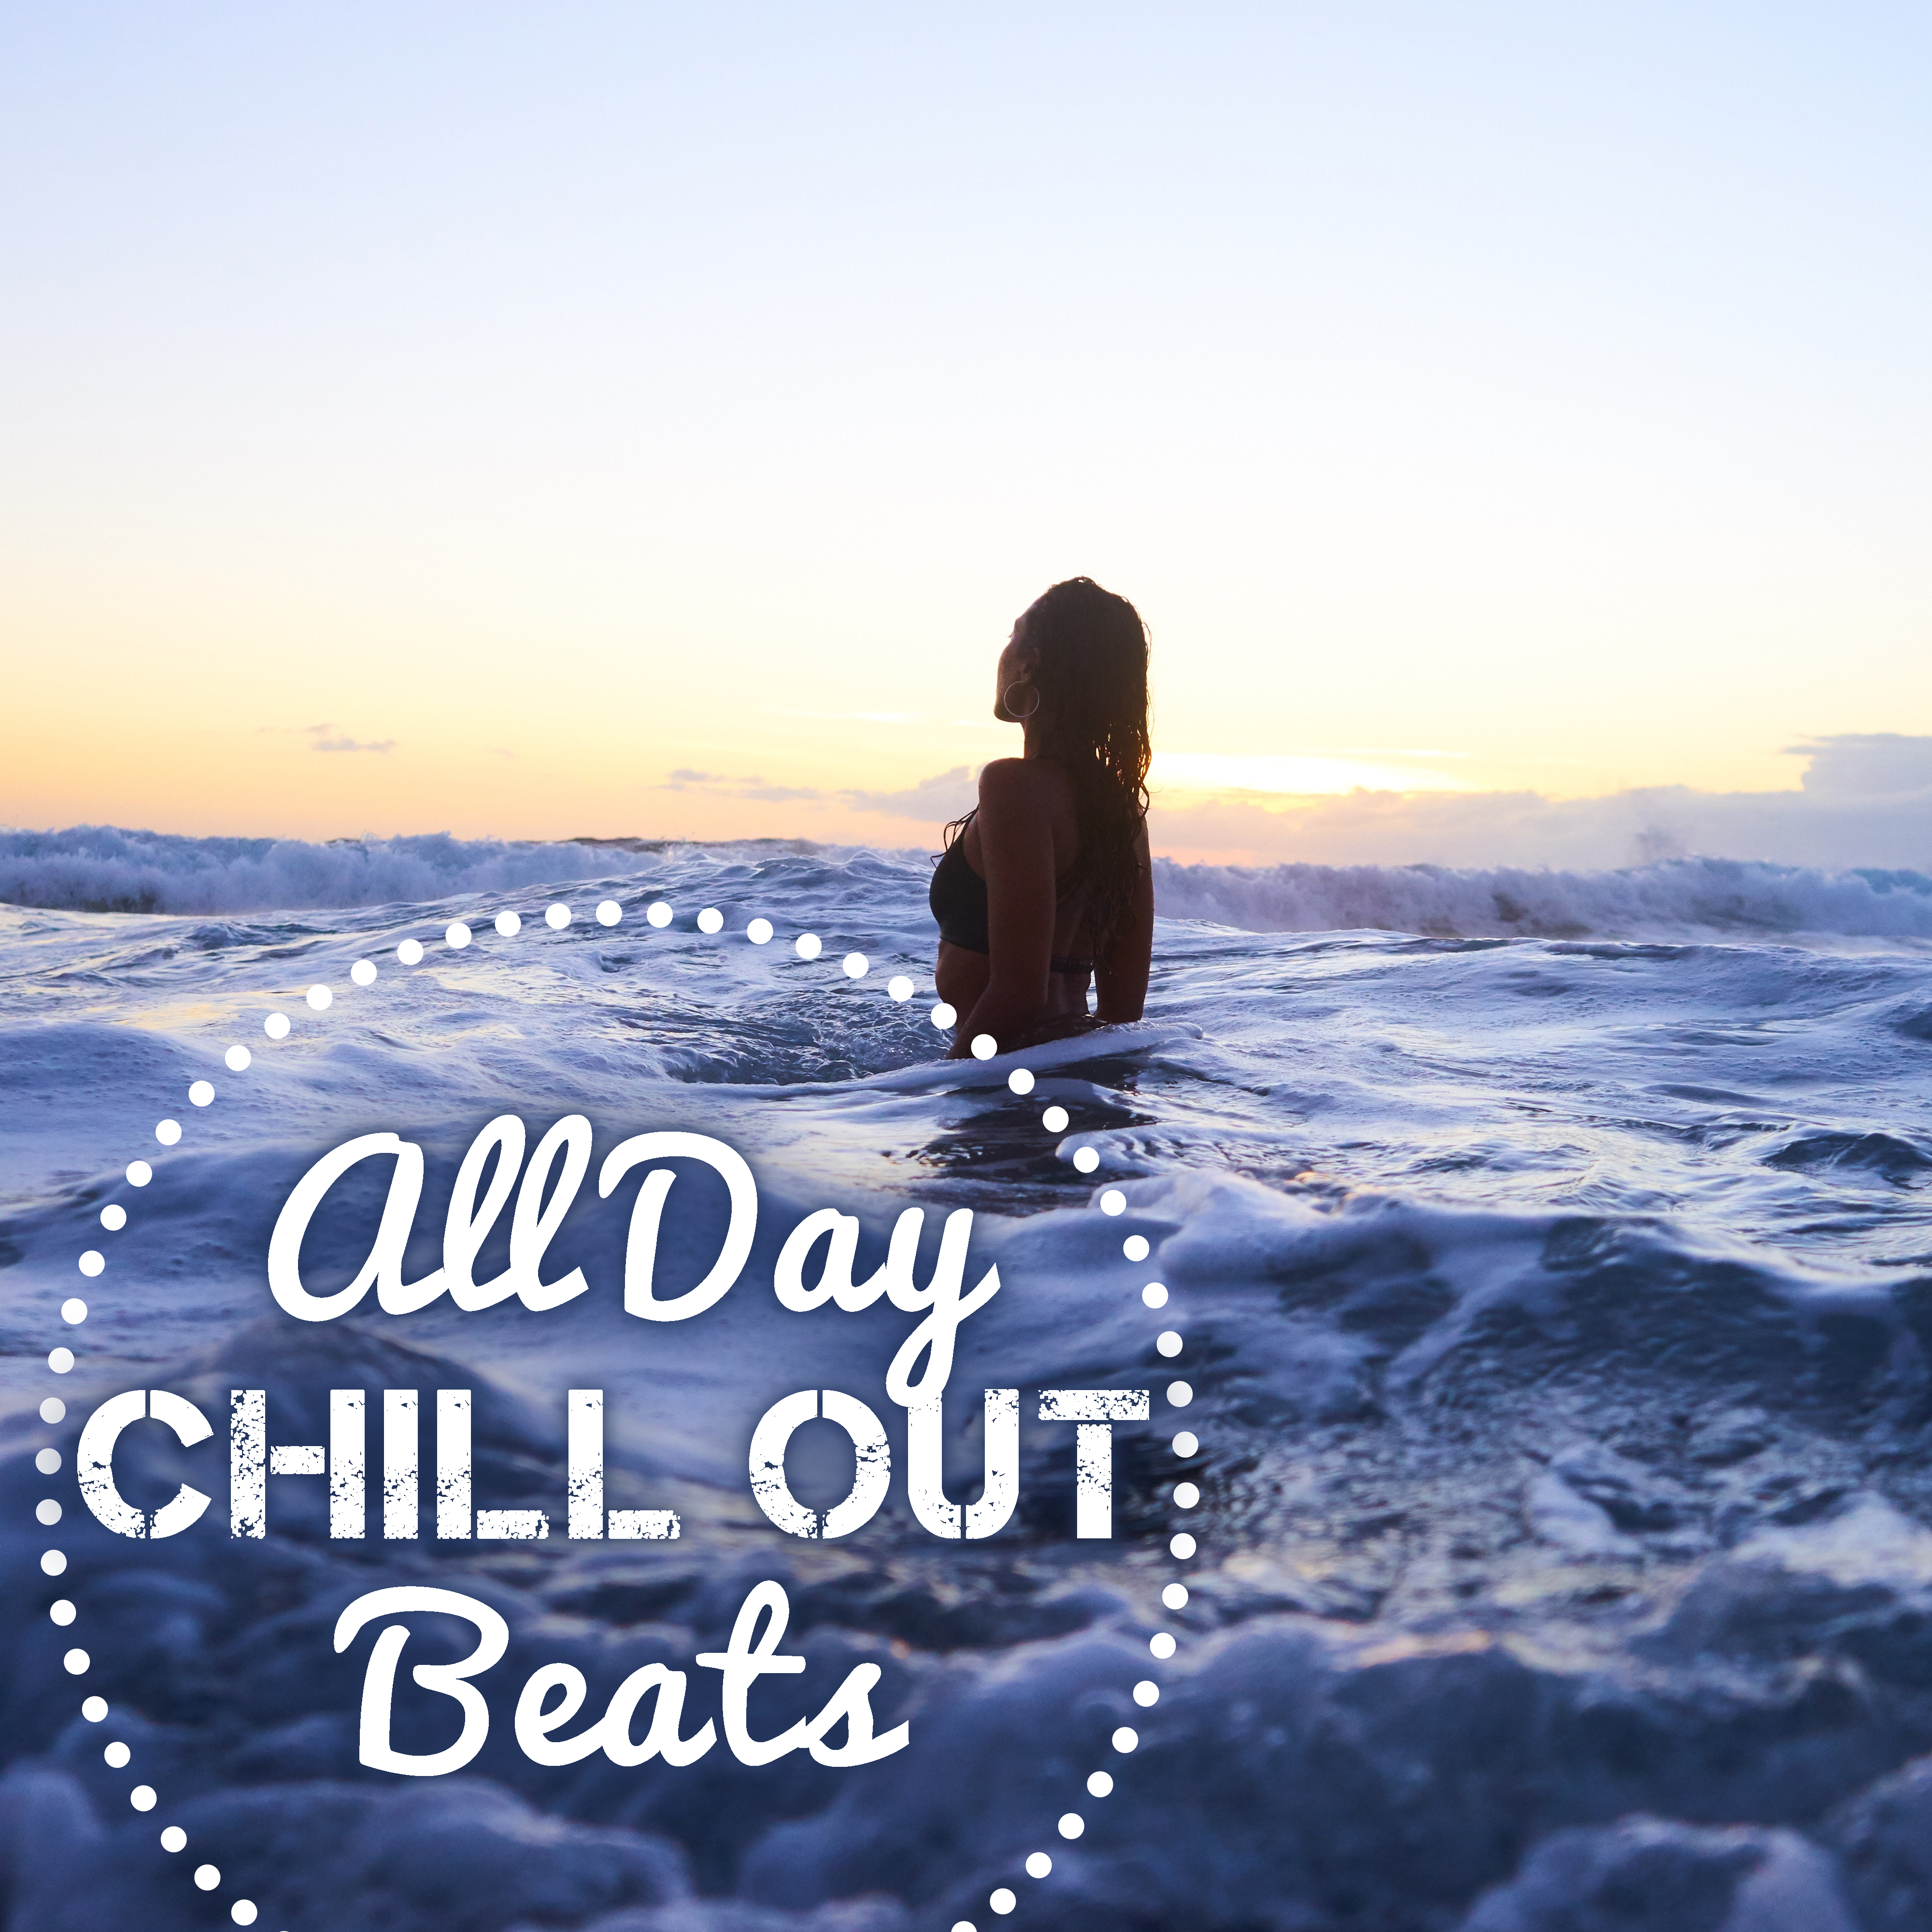 All Day Chill Out Beats – Summer Relaxing Songs, Easy Listening, Peaceful Vibes, Stress Relief, Beach Lounge, Chill Out Music